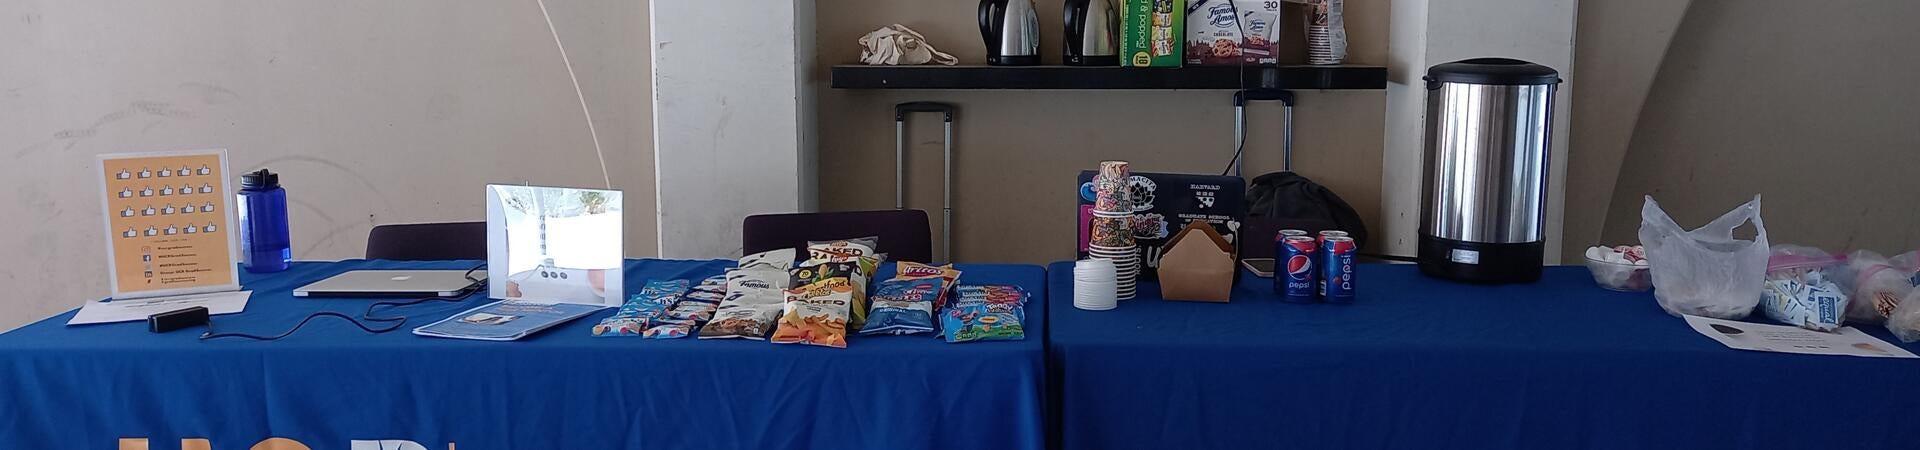 Coffee and snacks are presented on a GradSuccess table.